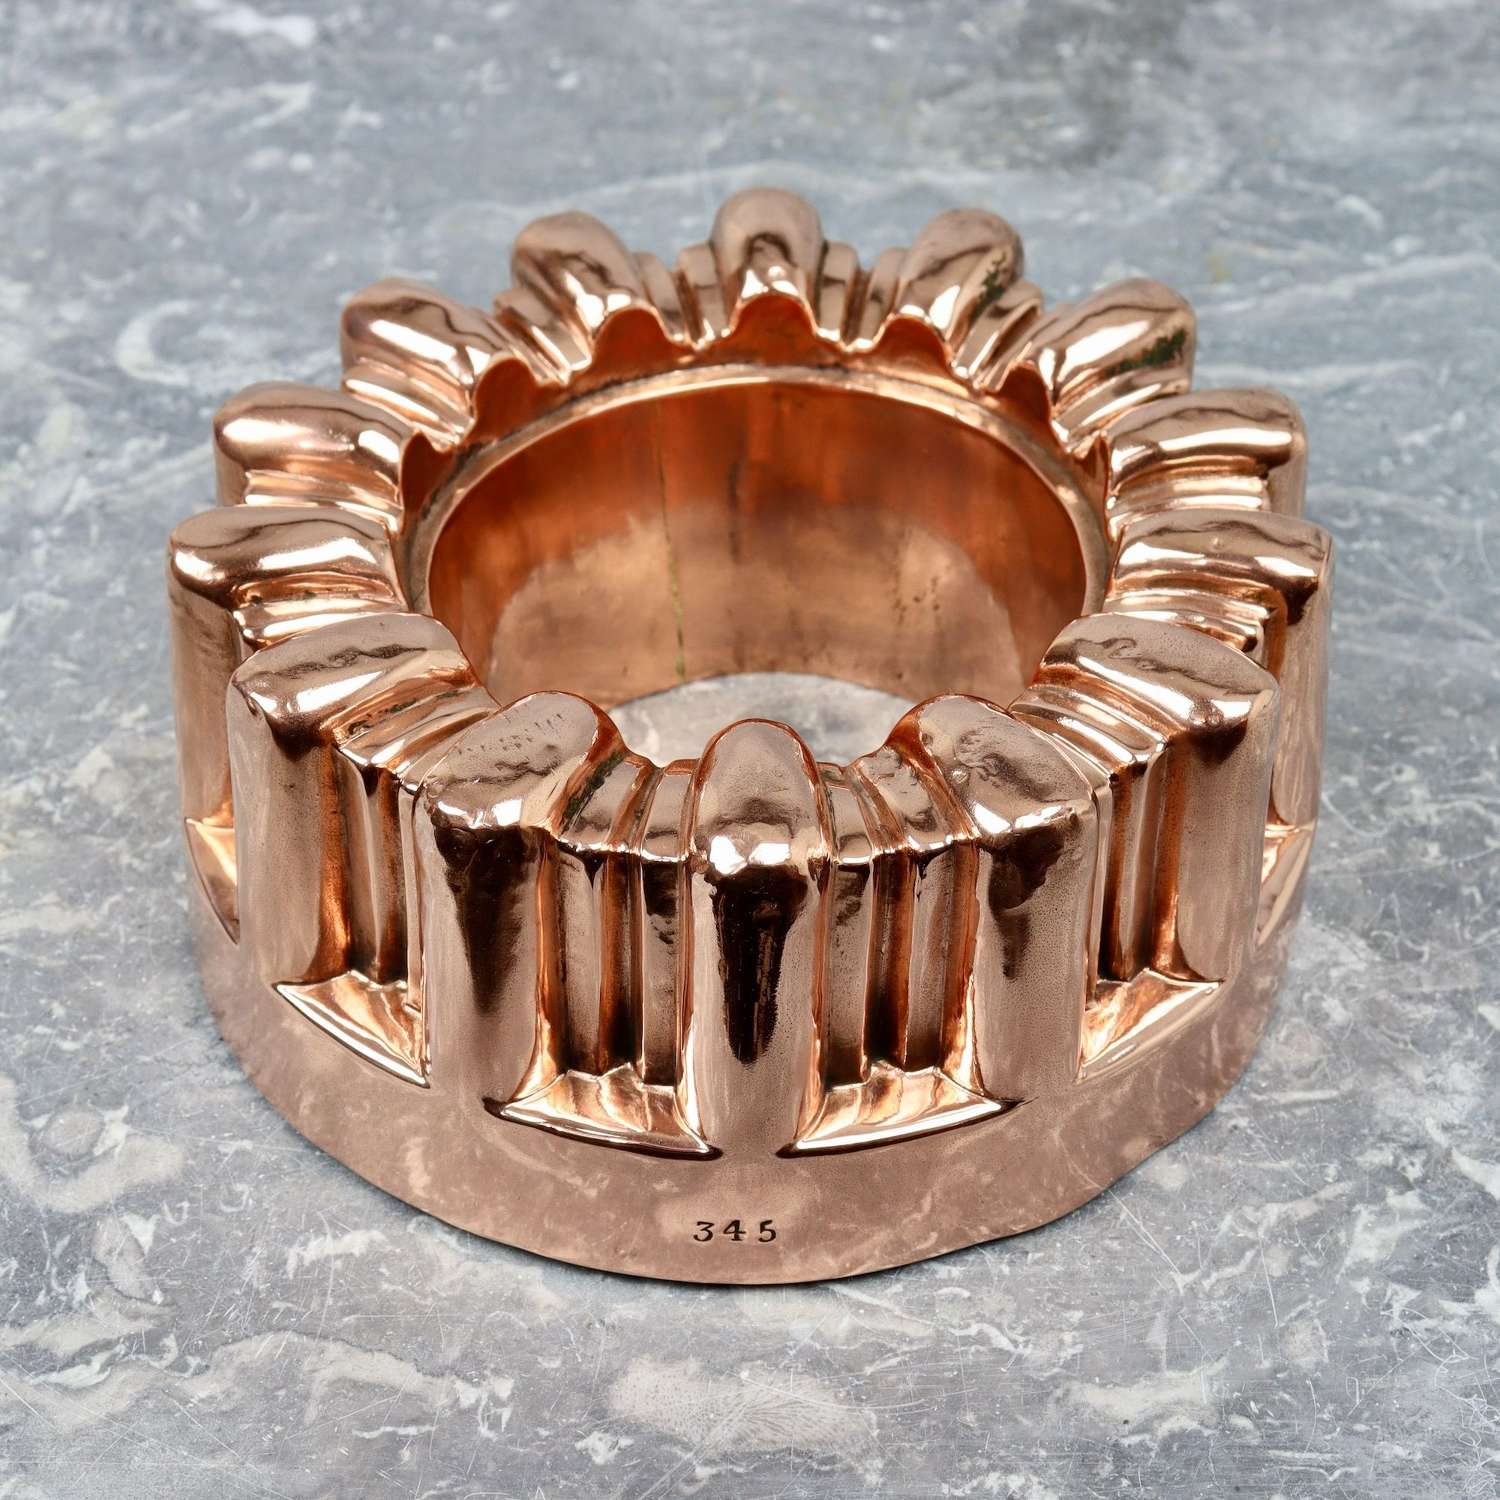 Copper Ring Mould Pattern 345